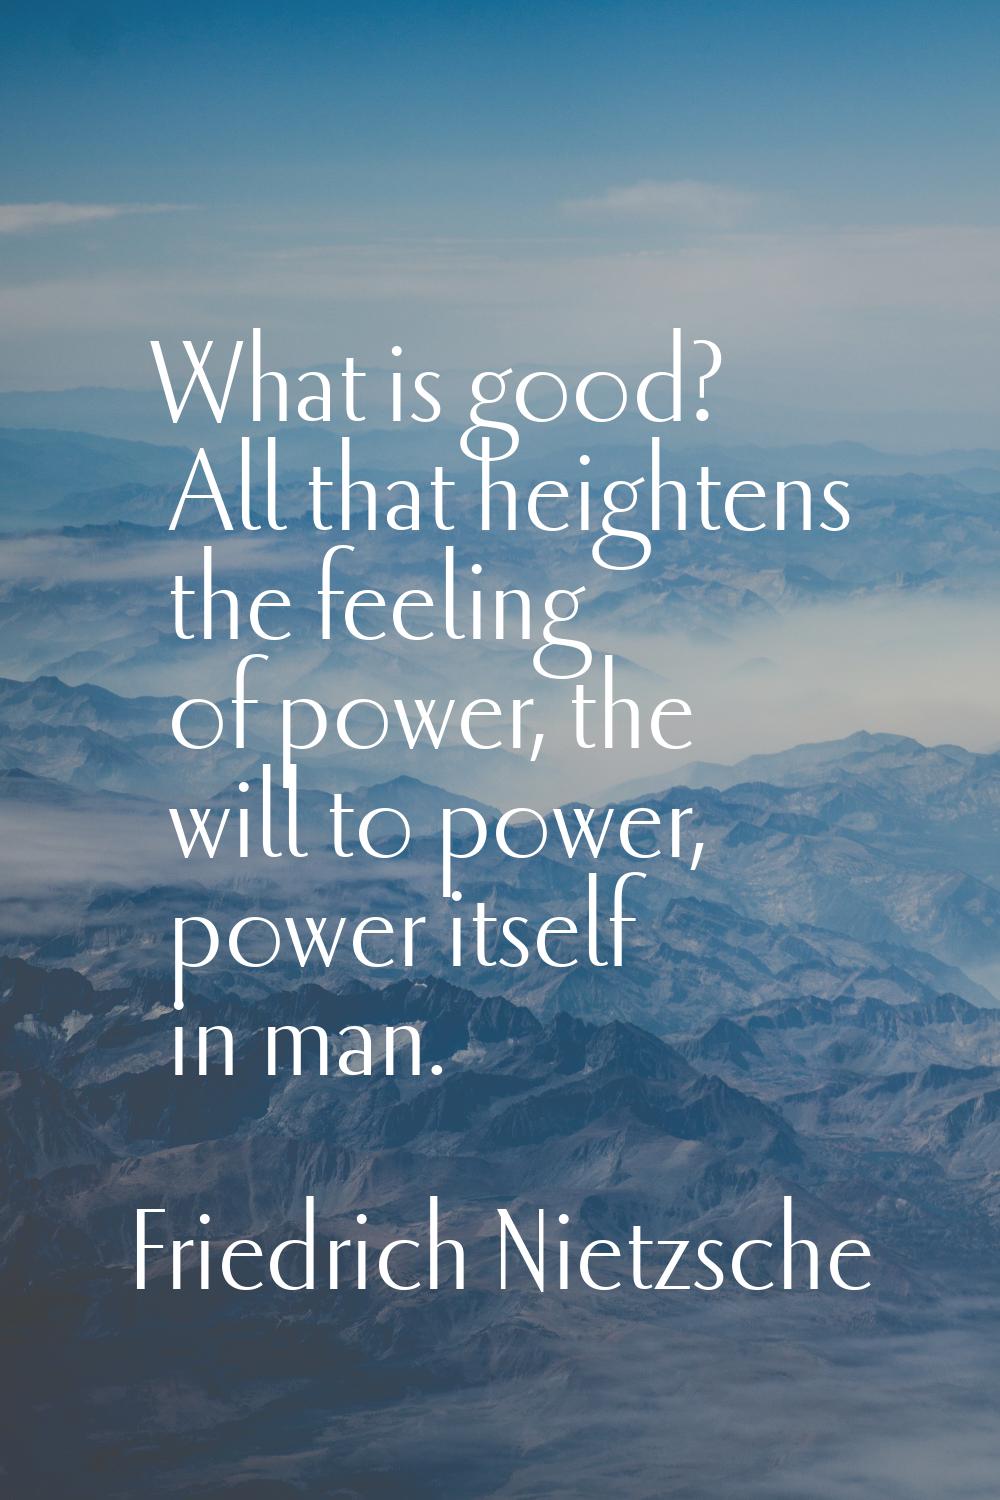 What is good? All that heightens the feeling of power, the will to power, power itself in man.